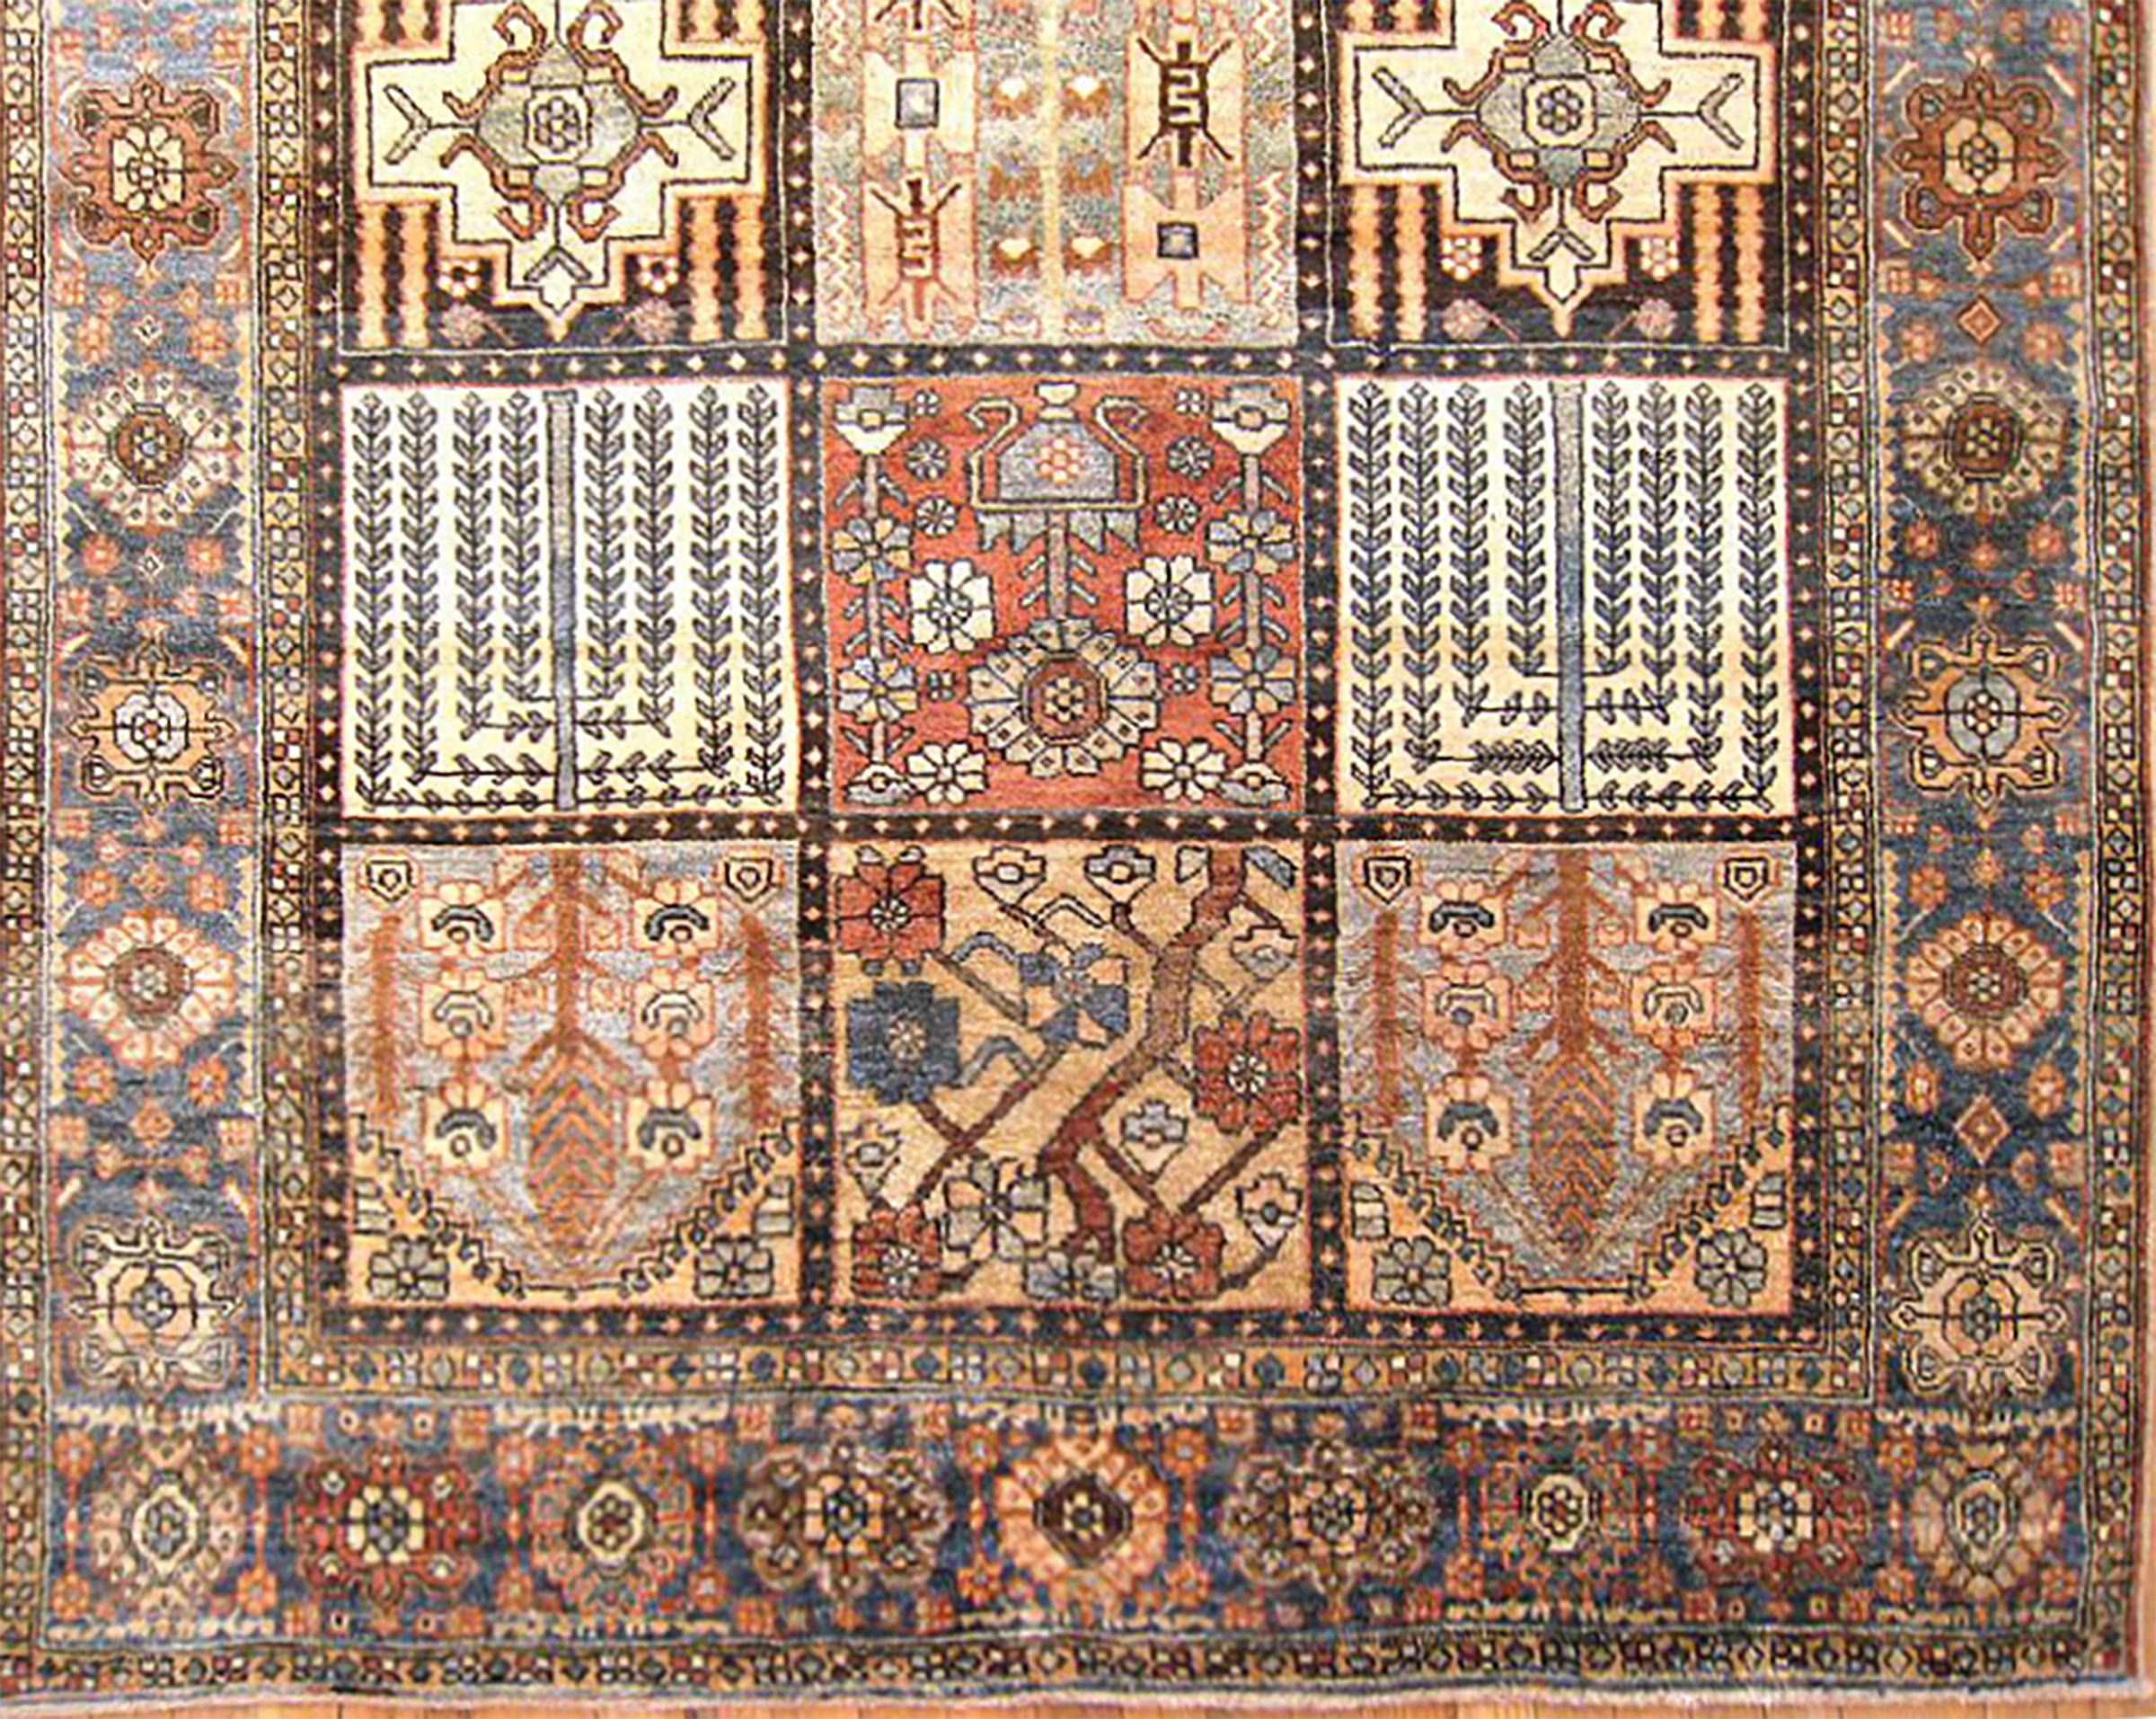 Hand-Knotted Antique Persian Baktiari Oriental Rug, in Small size, w/ Garden Design and Boxes